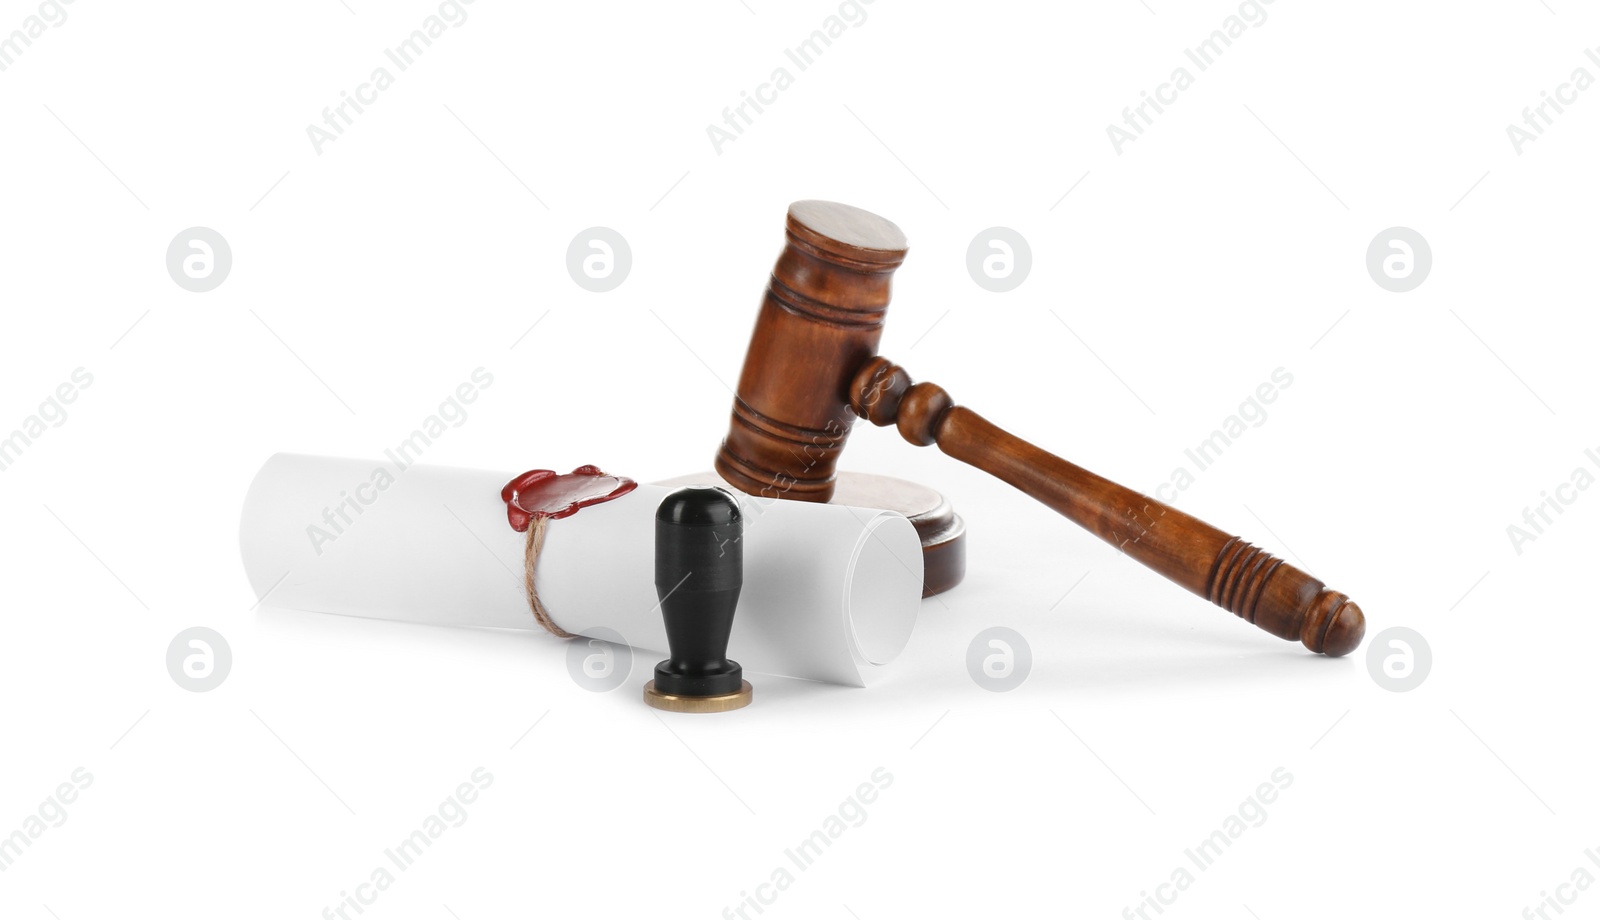 Photo of Notary's public pen, sealed document and gavel isolated on white